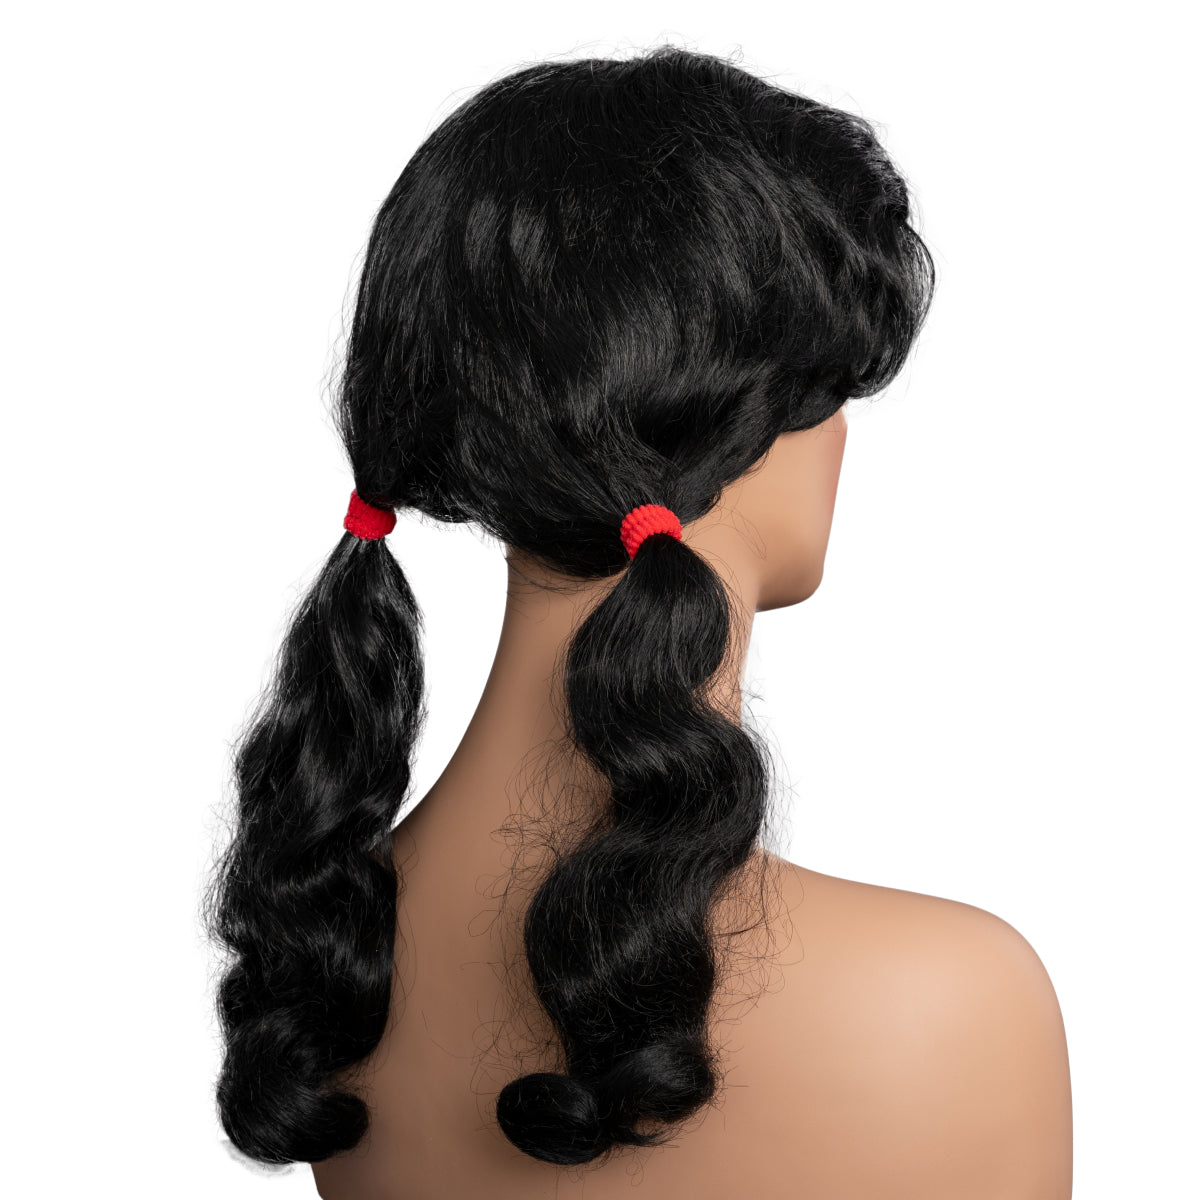 Penny Proud Cartoon Character Wig Back Side View